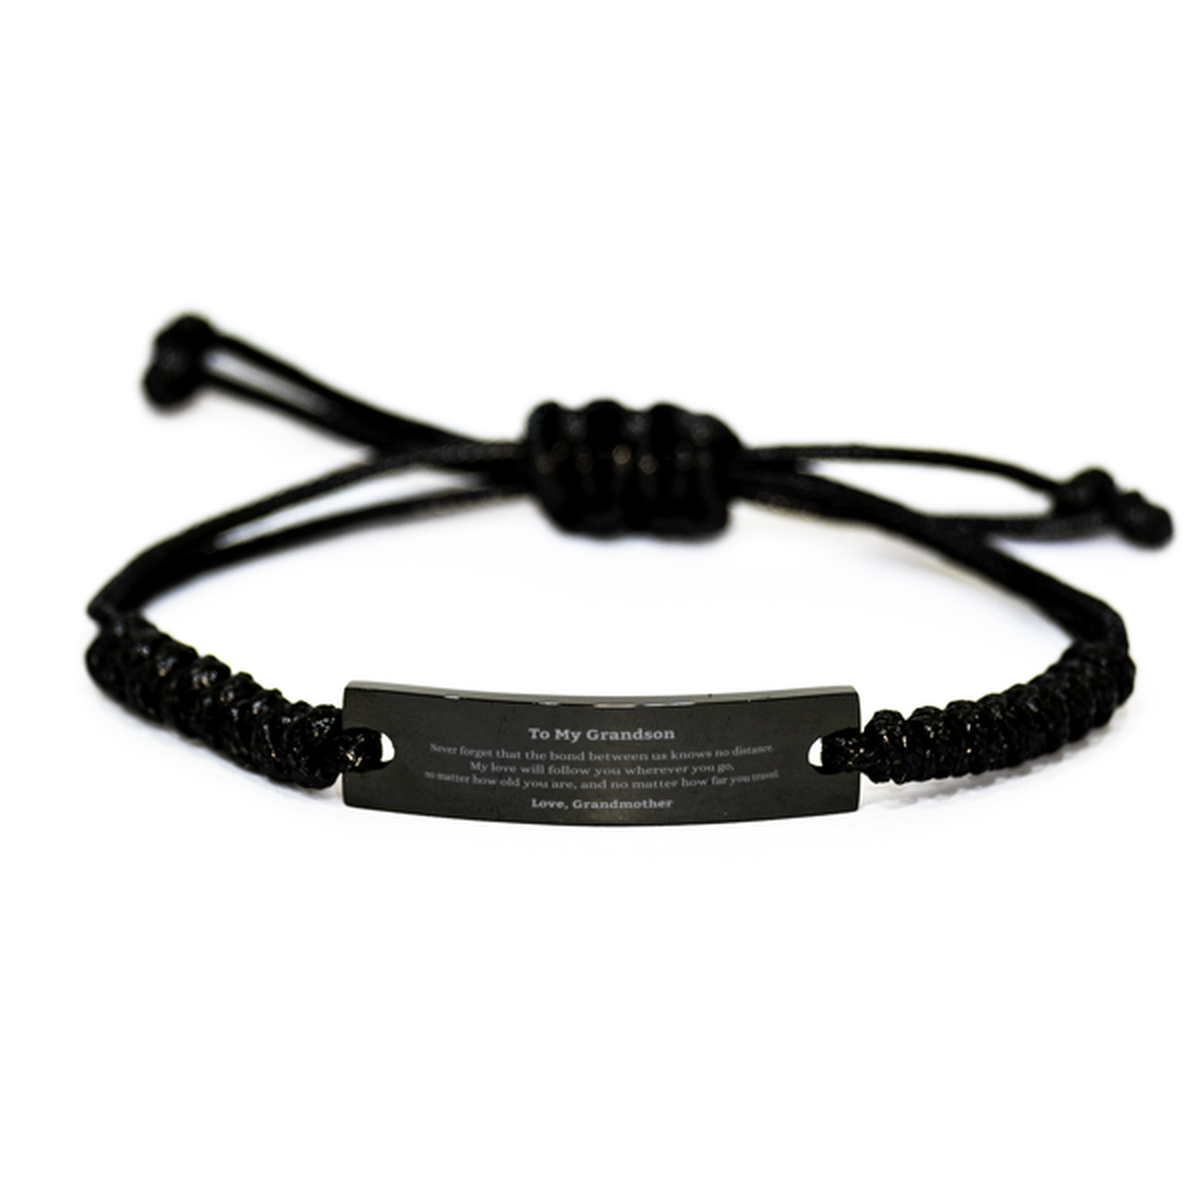 Grandson Birthday Gifts from Grandmother, Adjustable Black Rope Bracelet for Grandson Christmas Graduation Unique Gifts Grandson Never forget that the bond between us knows no distance. Love, Grandmother